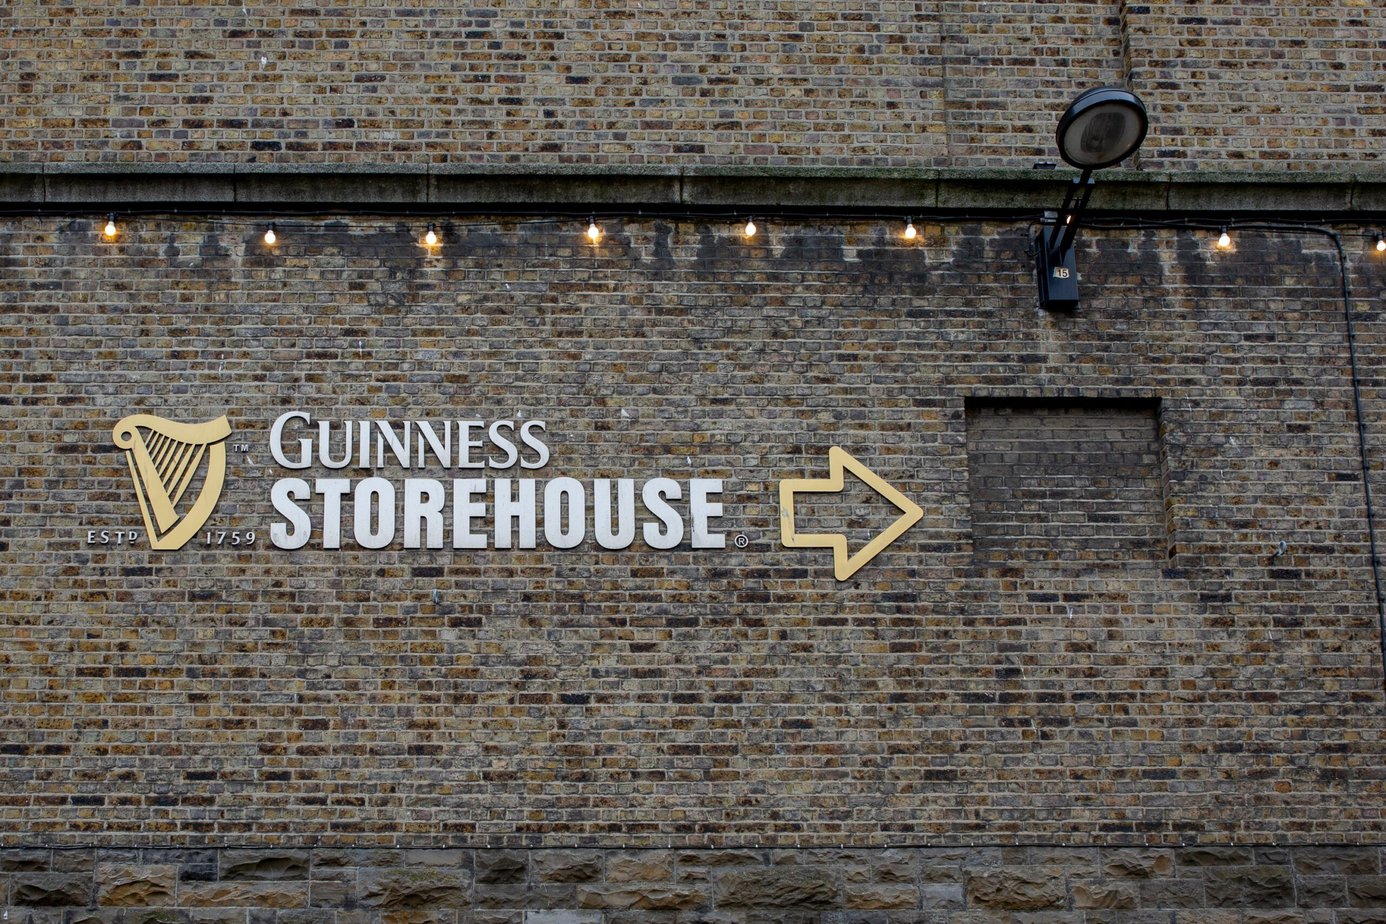 Guiness storehouse best in Europe